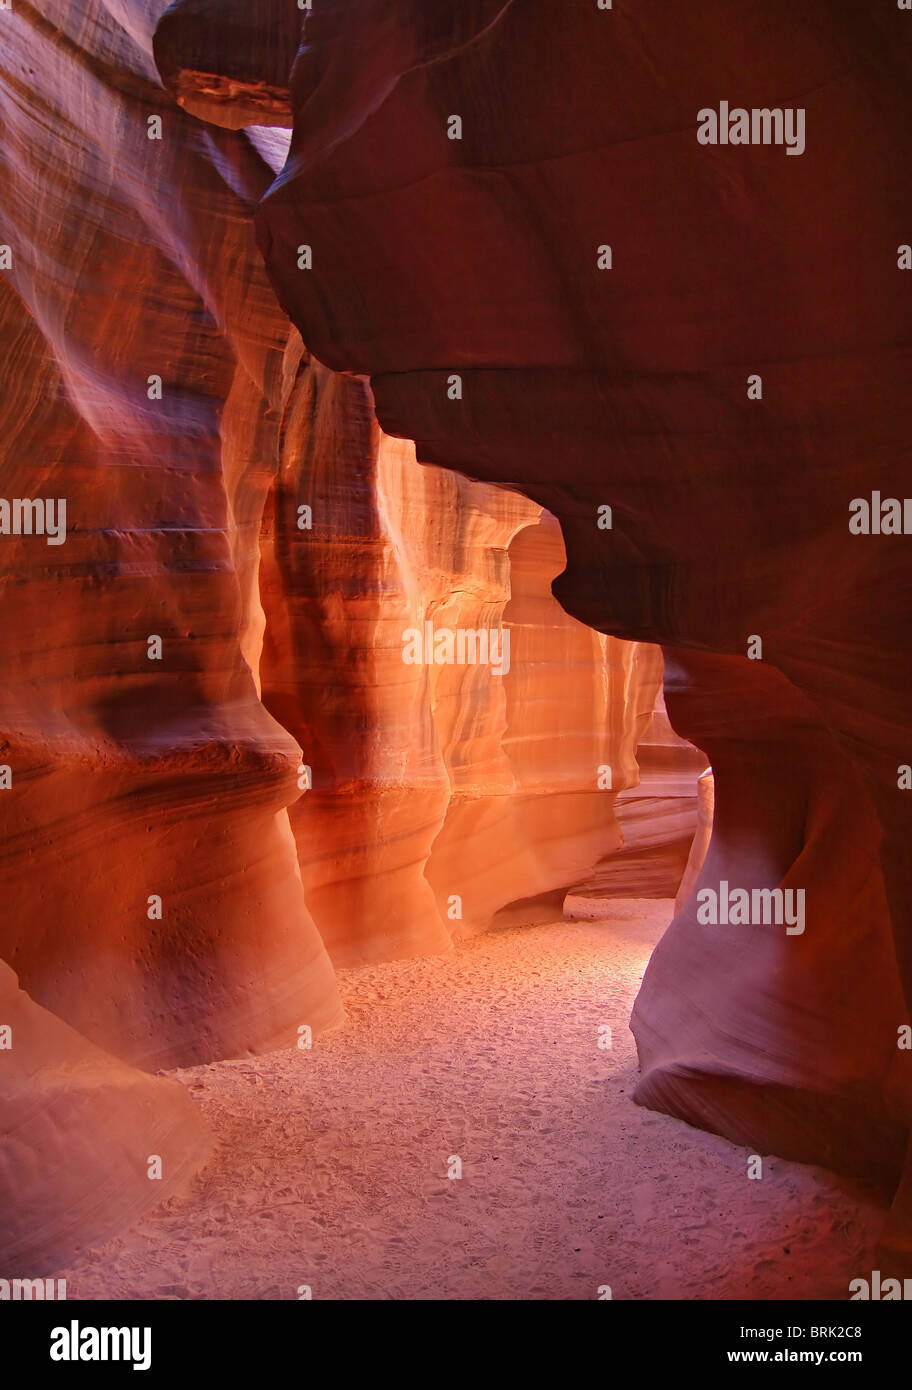 famous Antelope Canyon in Page Arizona with smooth orange walls Stock Photo